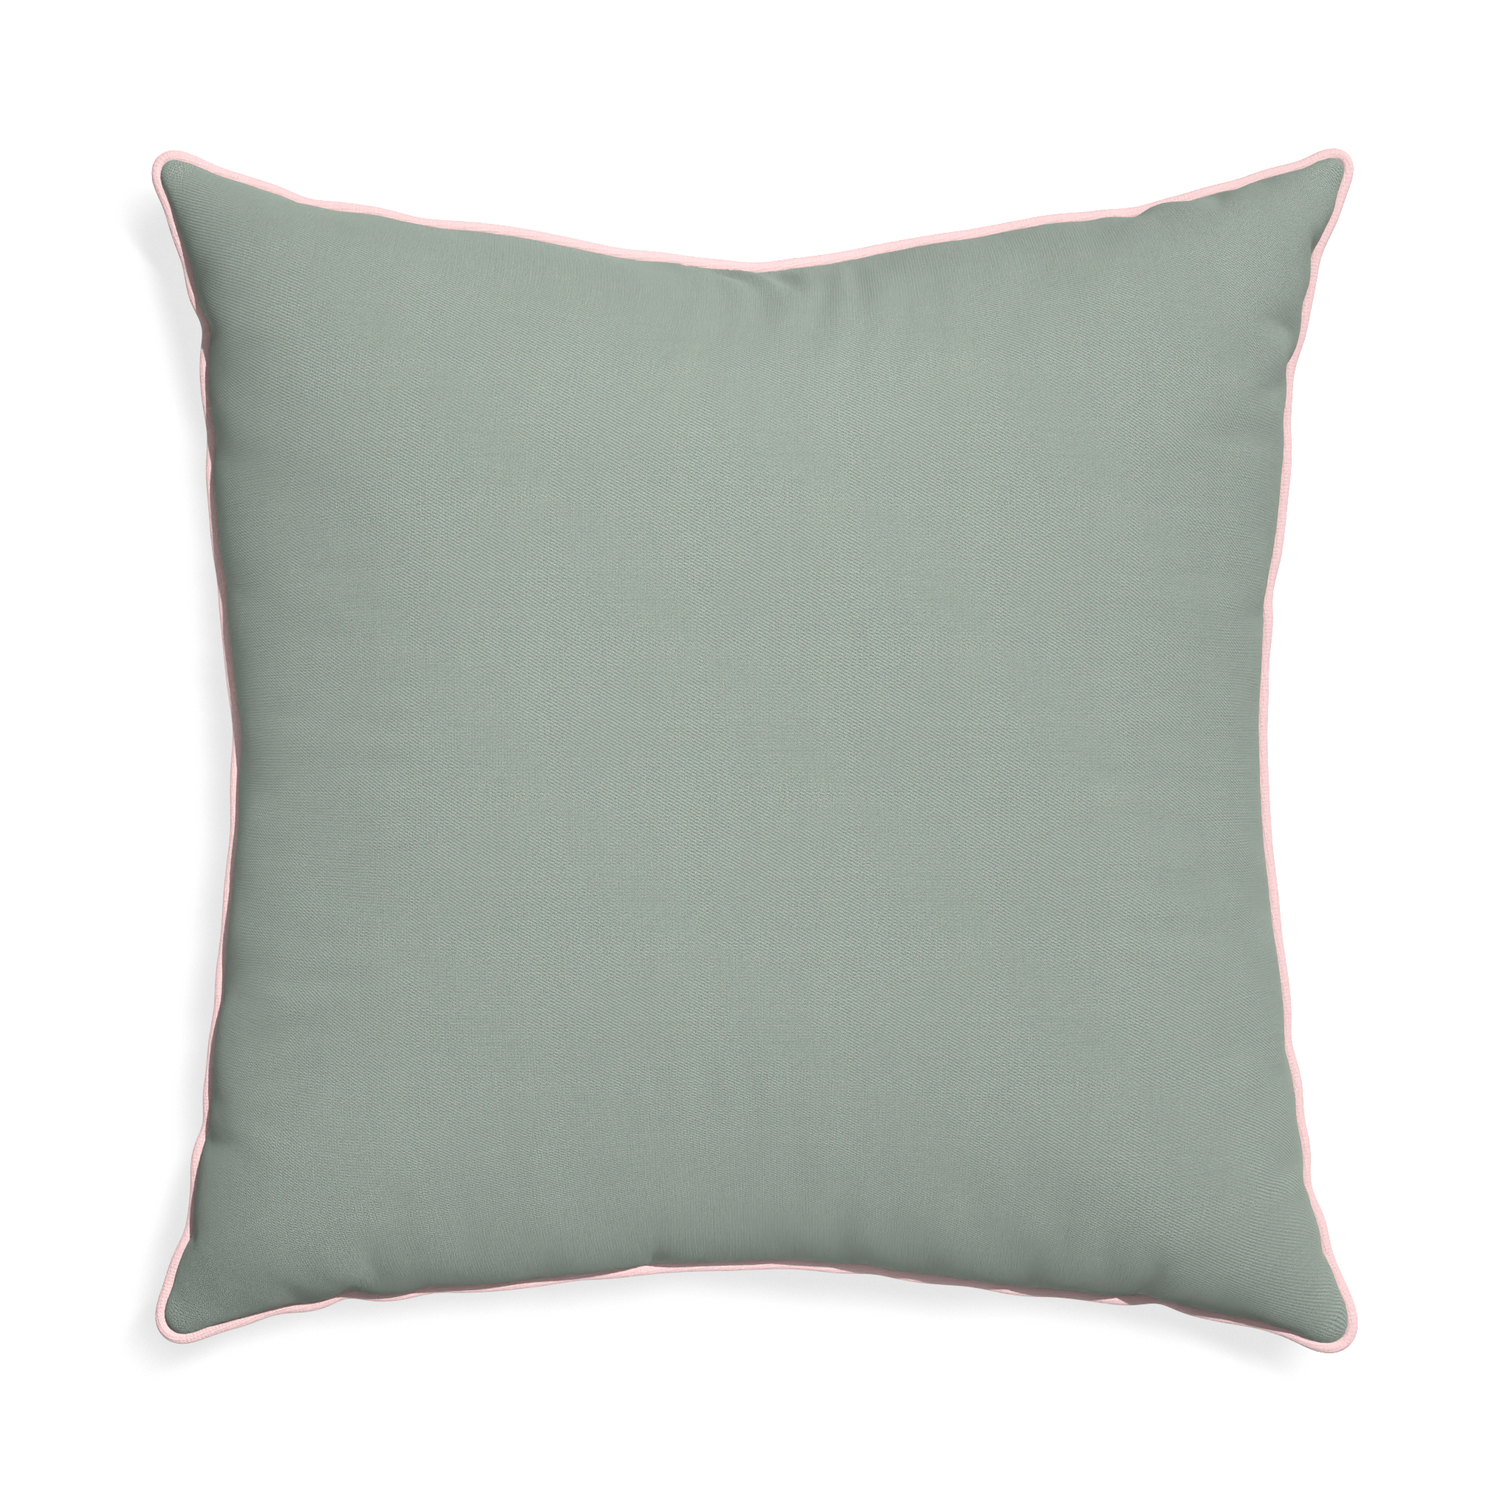 Euro-sham sage custom pillow with petal piping on white background